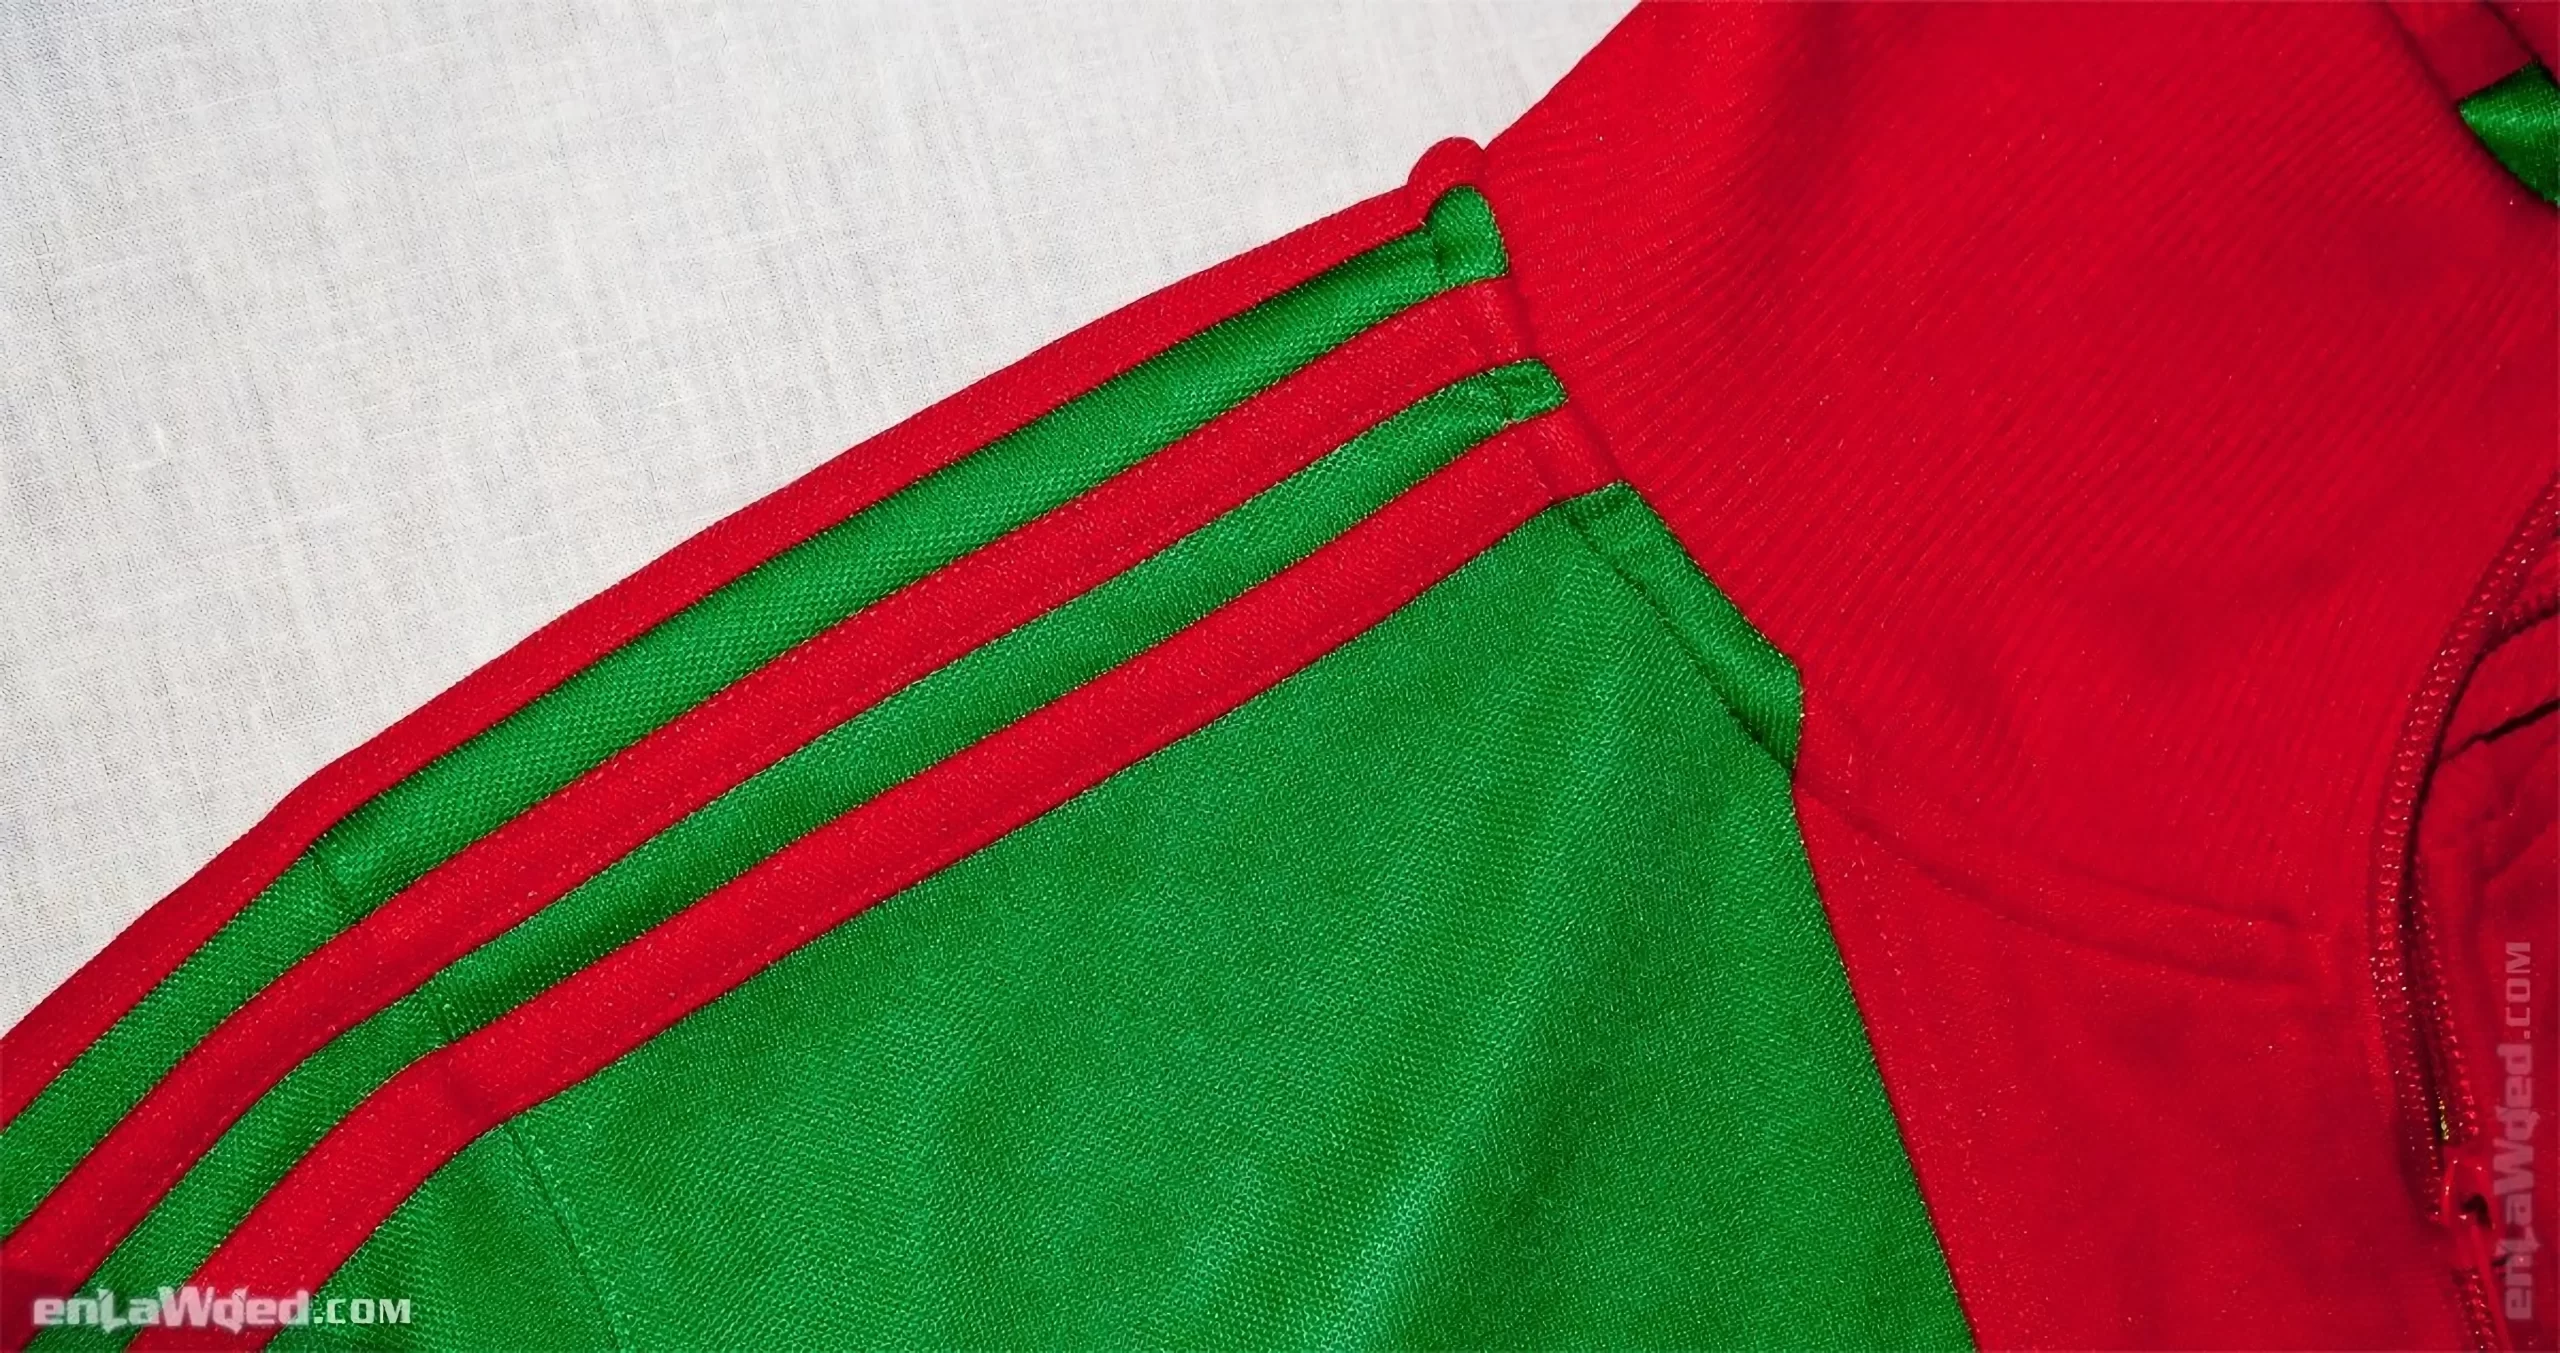 13th interior view of the Adidas Originals Cameroon Track Top